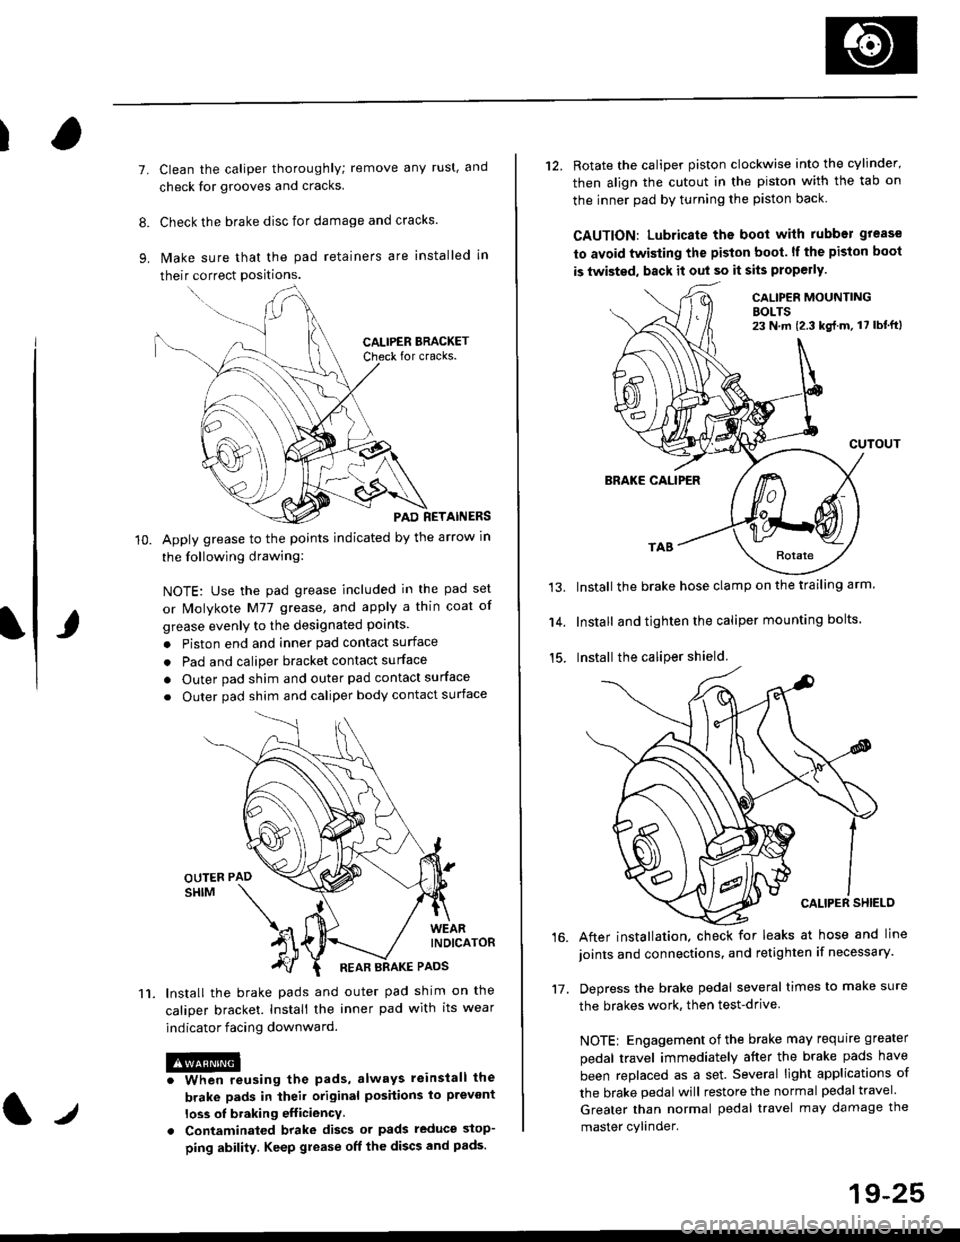 HONDA CIVIC 1999 6.G User Guide I
7.
11.
Clean the caliper thoroughly; remove any rust, and
check for grooves and cracks.
Check the brake disc for damage and cracks.
lvlake sure that the pad retainers are installed in
their correct 